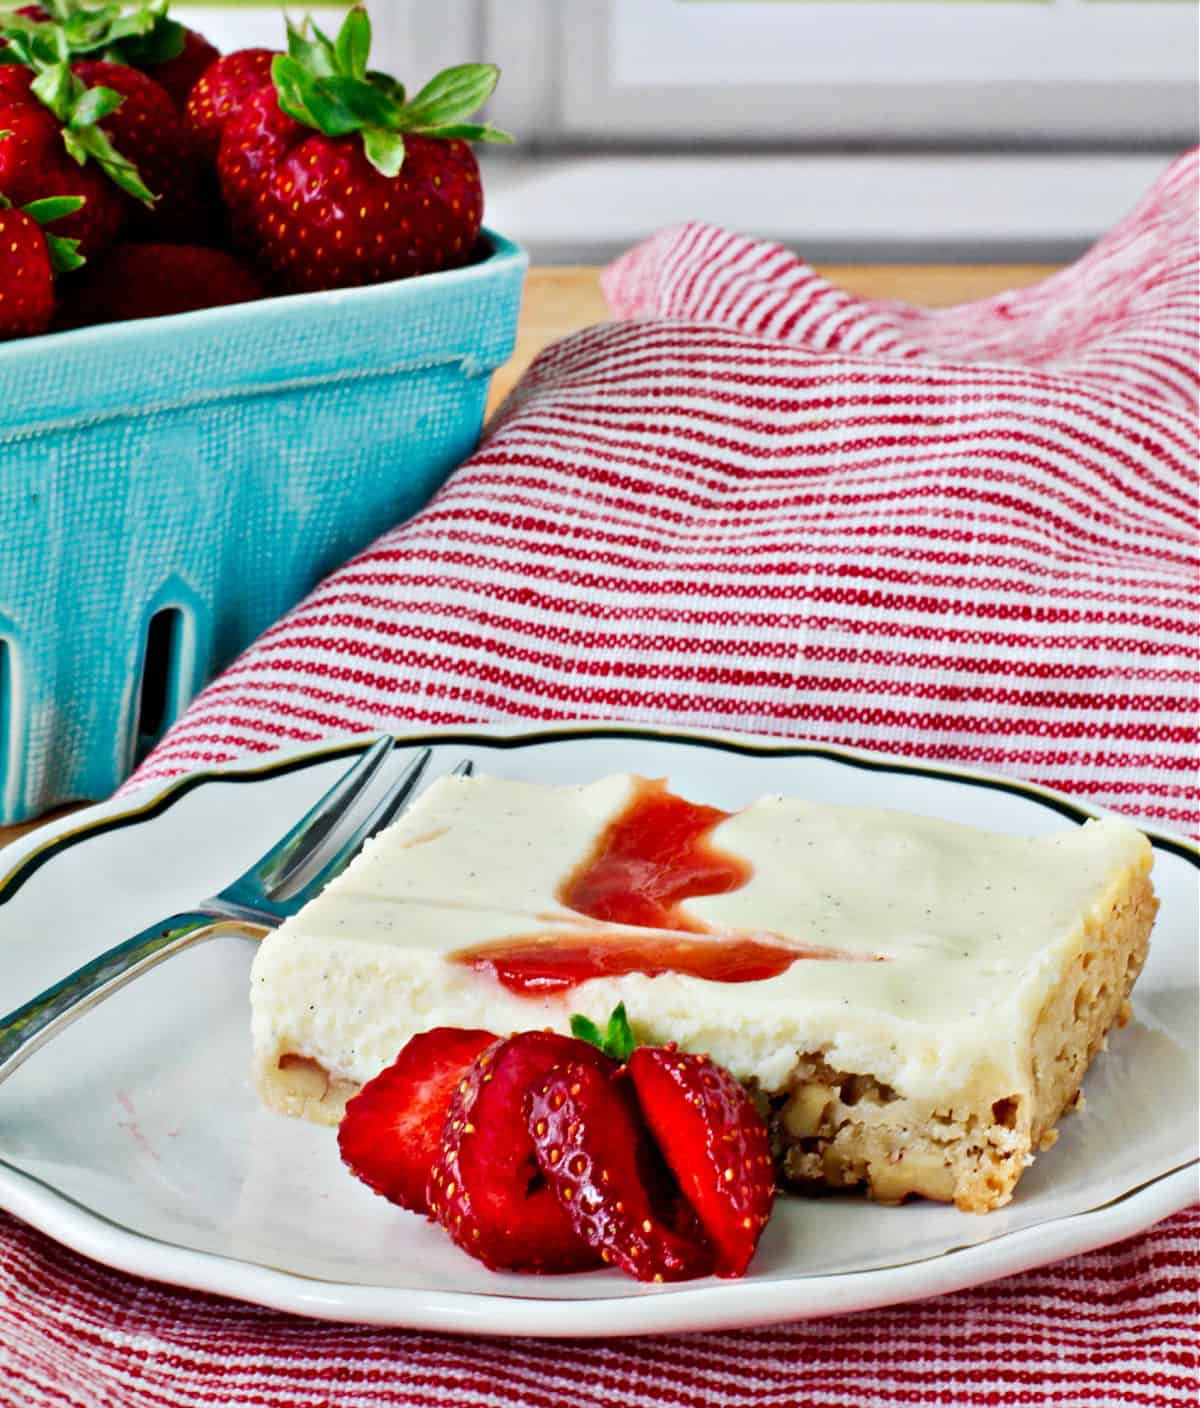 Strawberry Cheesecake Bar on a plate with strawberries in a basket.